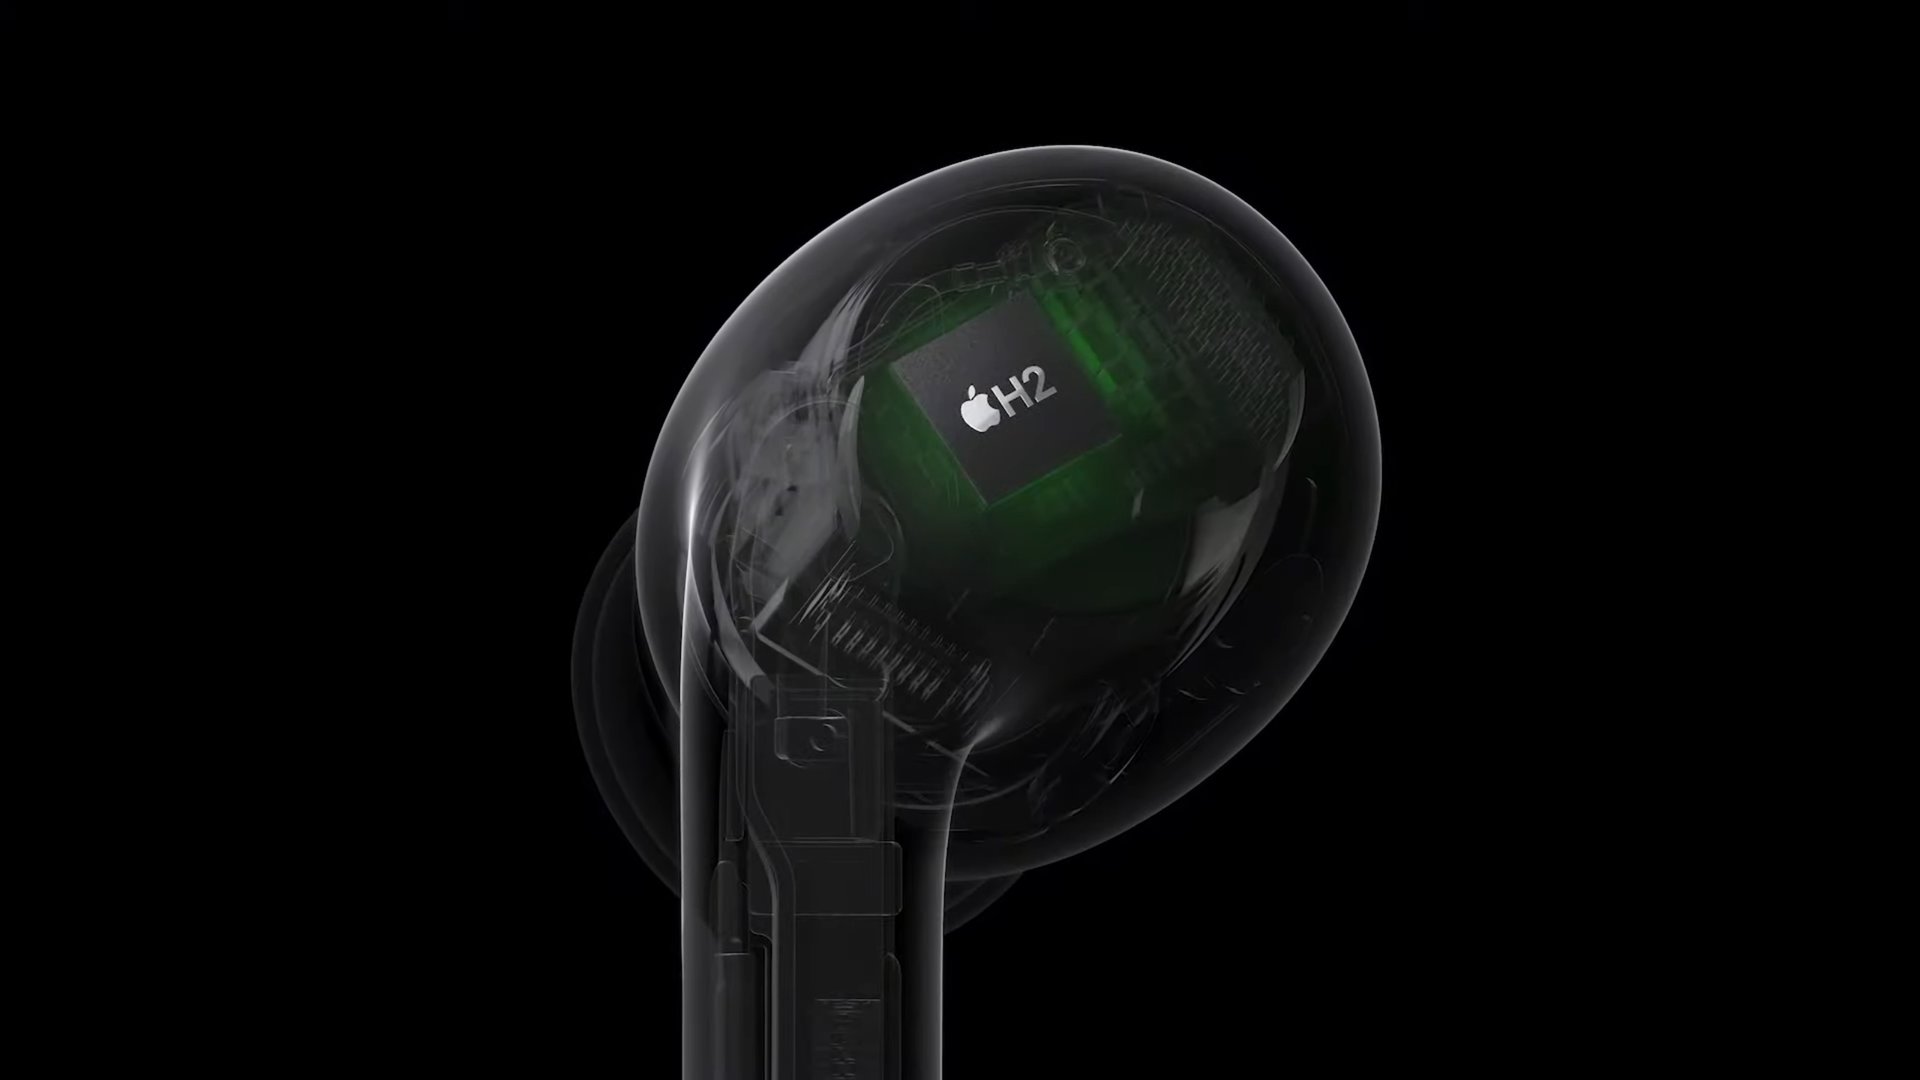 A product image of the AirPods Pro (2nd generation) showing the internals of an earbud including the H2 chip.